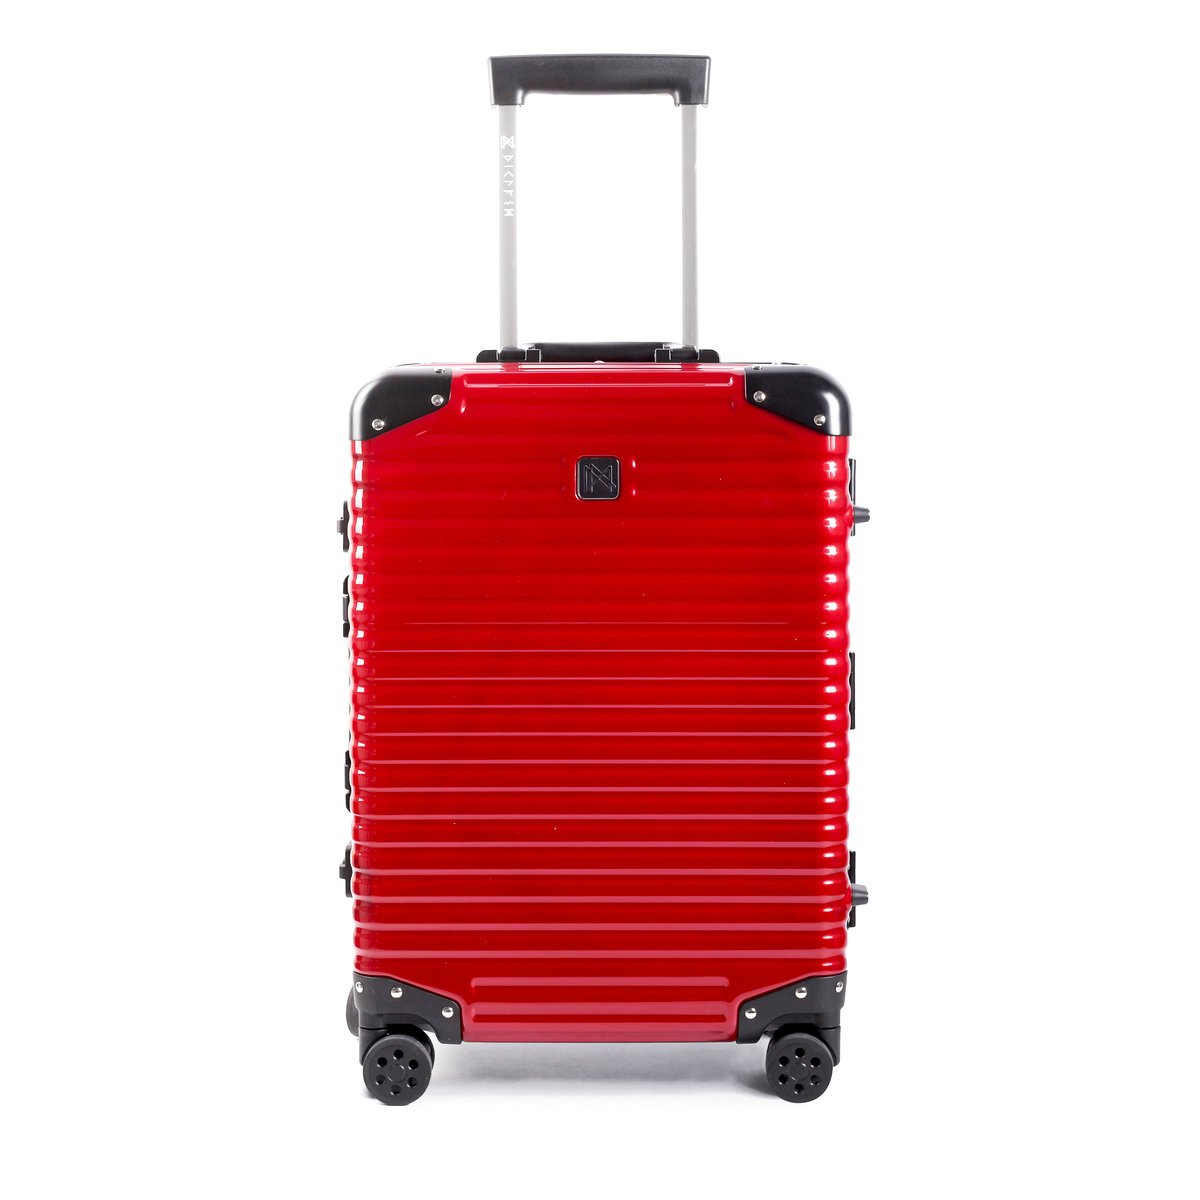 Lanzzo Norman Light series wine red 29 -inch travel luggage 